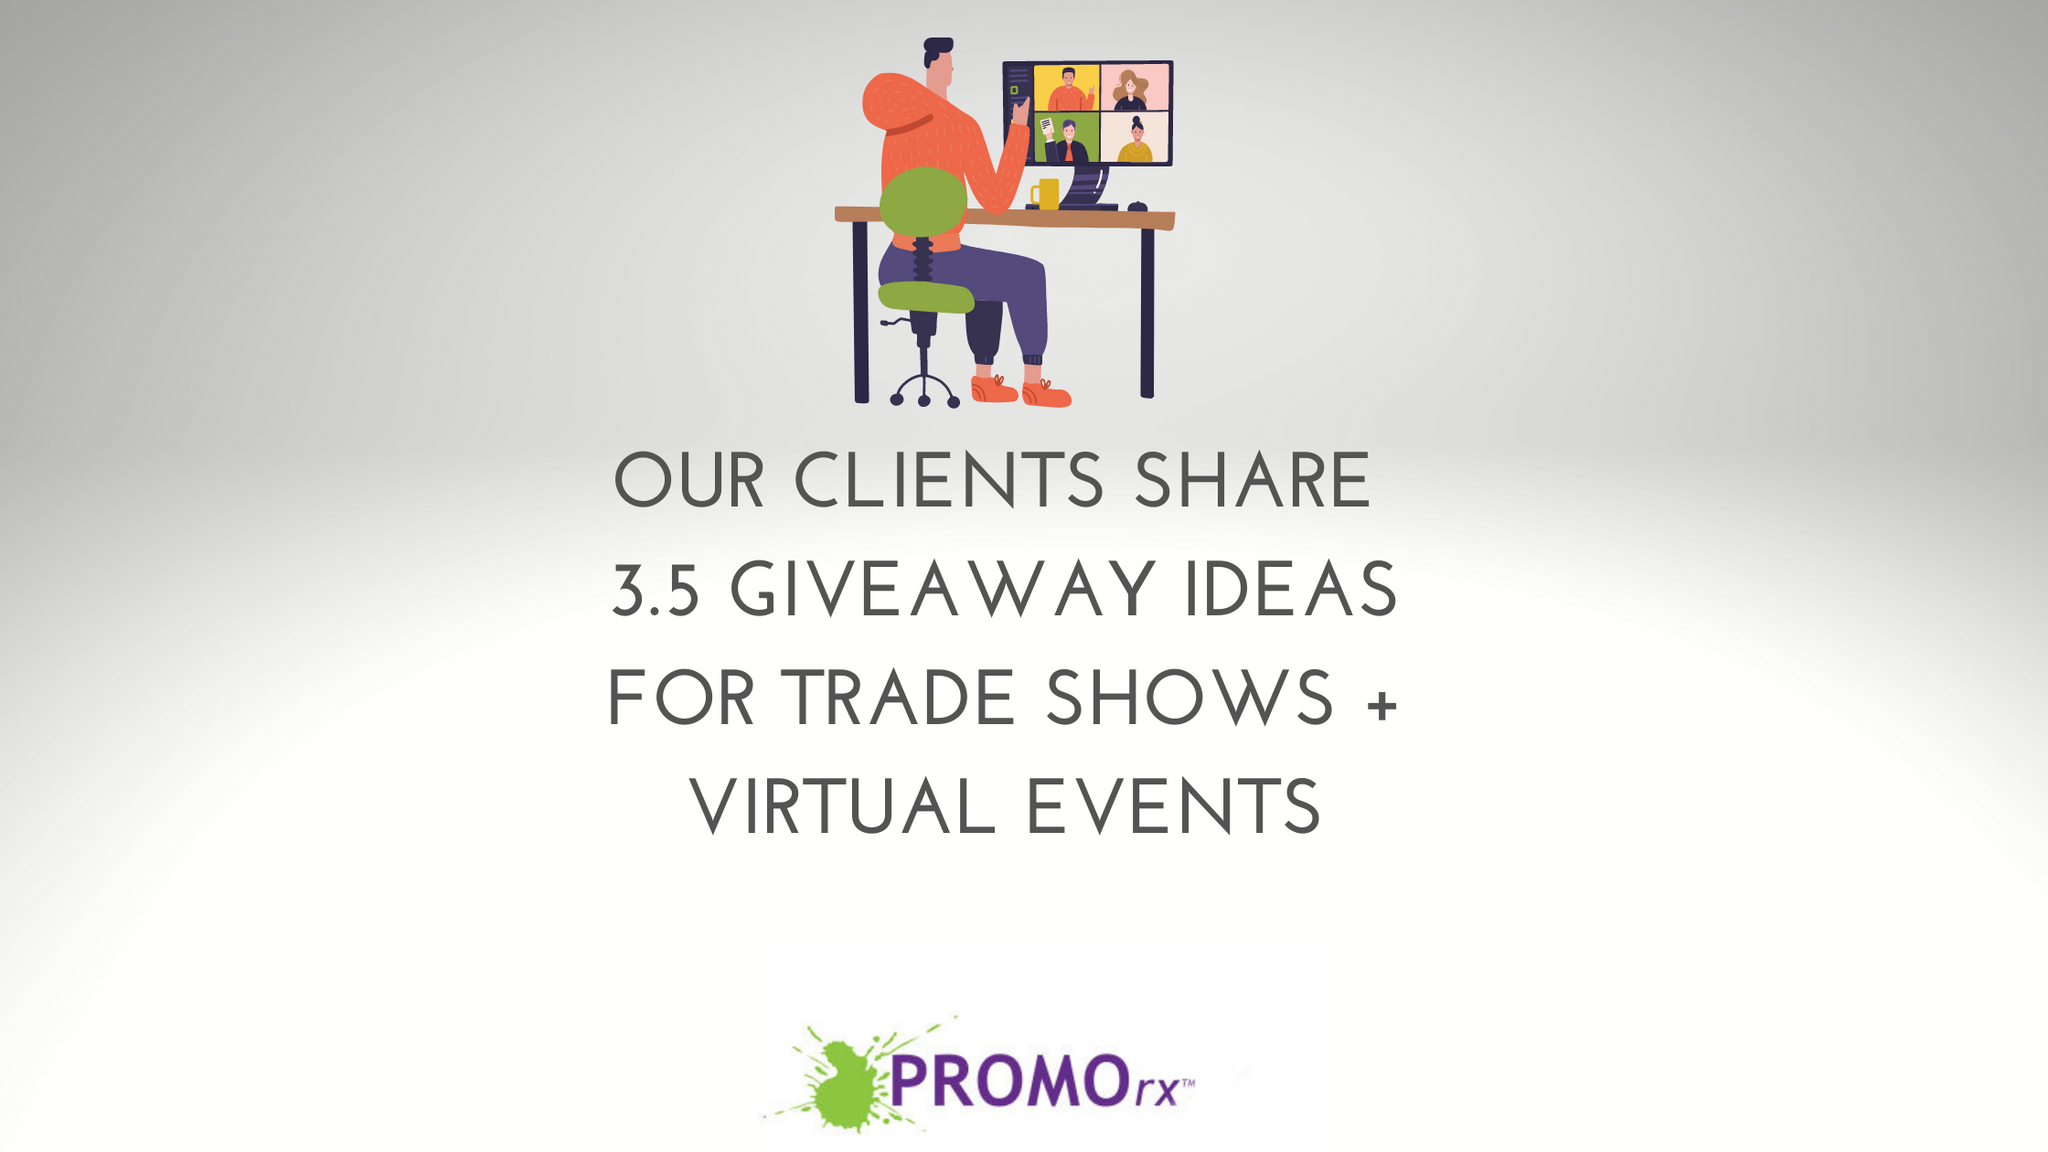 Our Clients Share 3.5 Giveaway Ideas for Trade Shows + Virtual Events